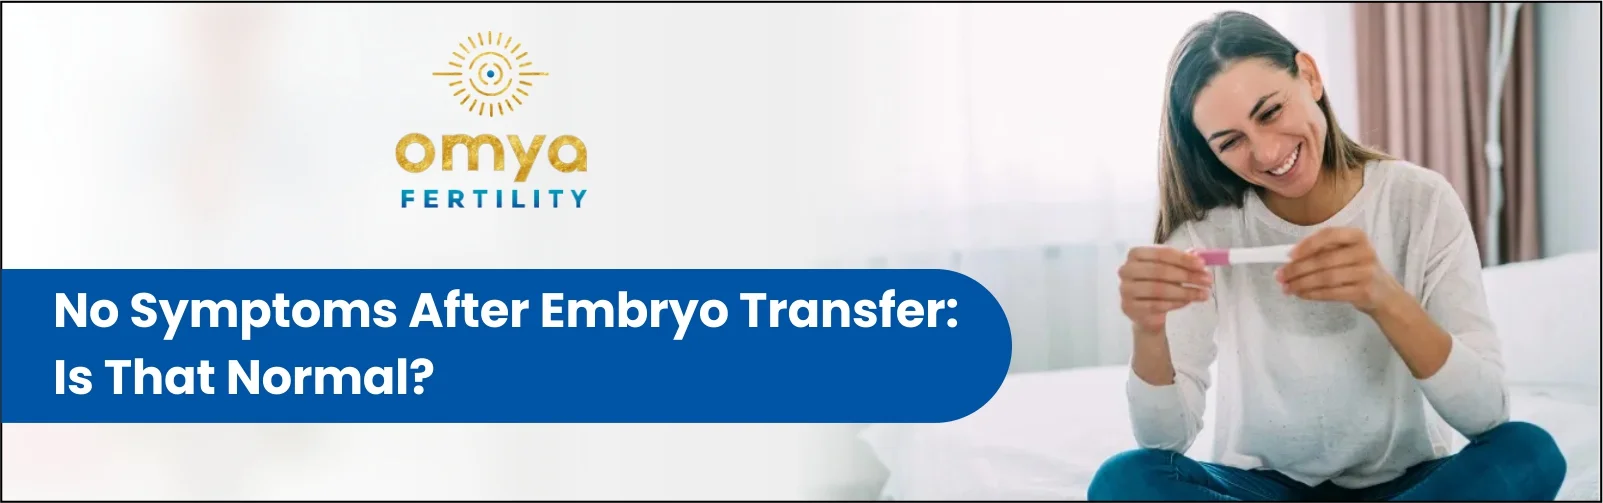 No Symptoms After Embryo Transfer: Is That Normal?